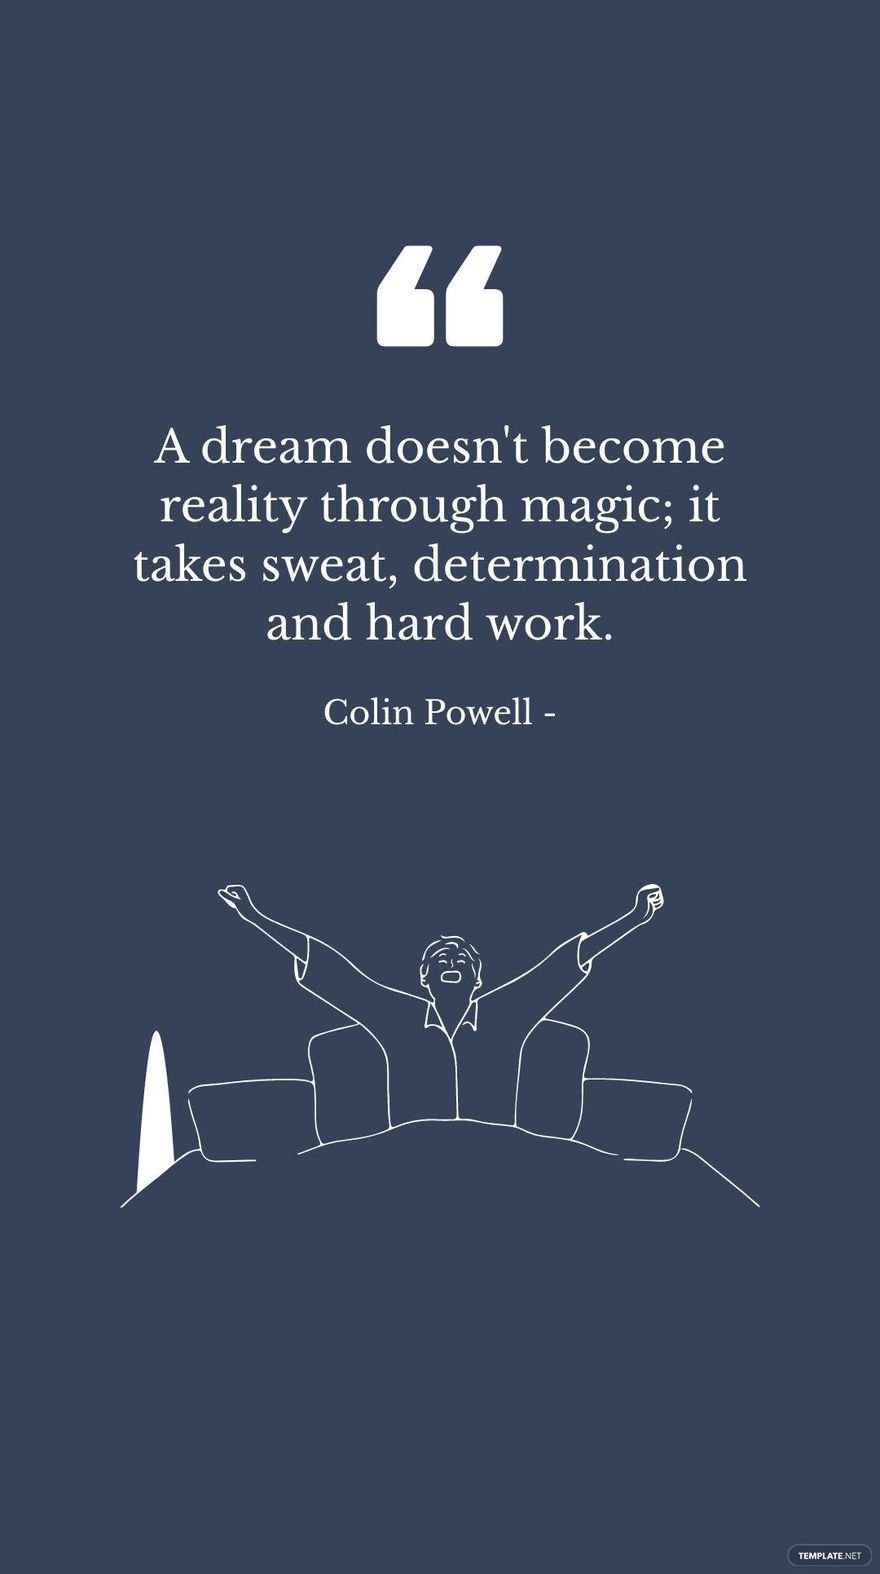 Colin Powell - A dream doesn't become reality through magic; it takes sweat, determination and hard work.